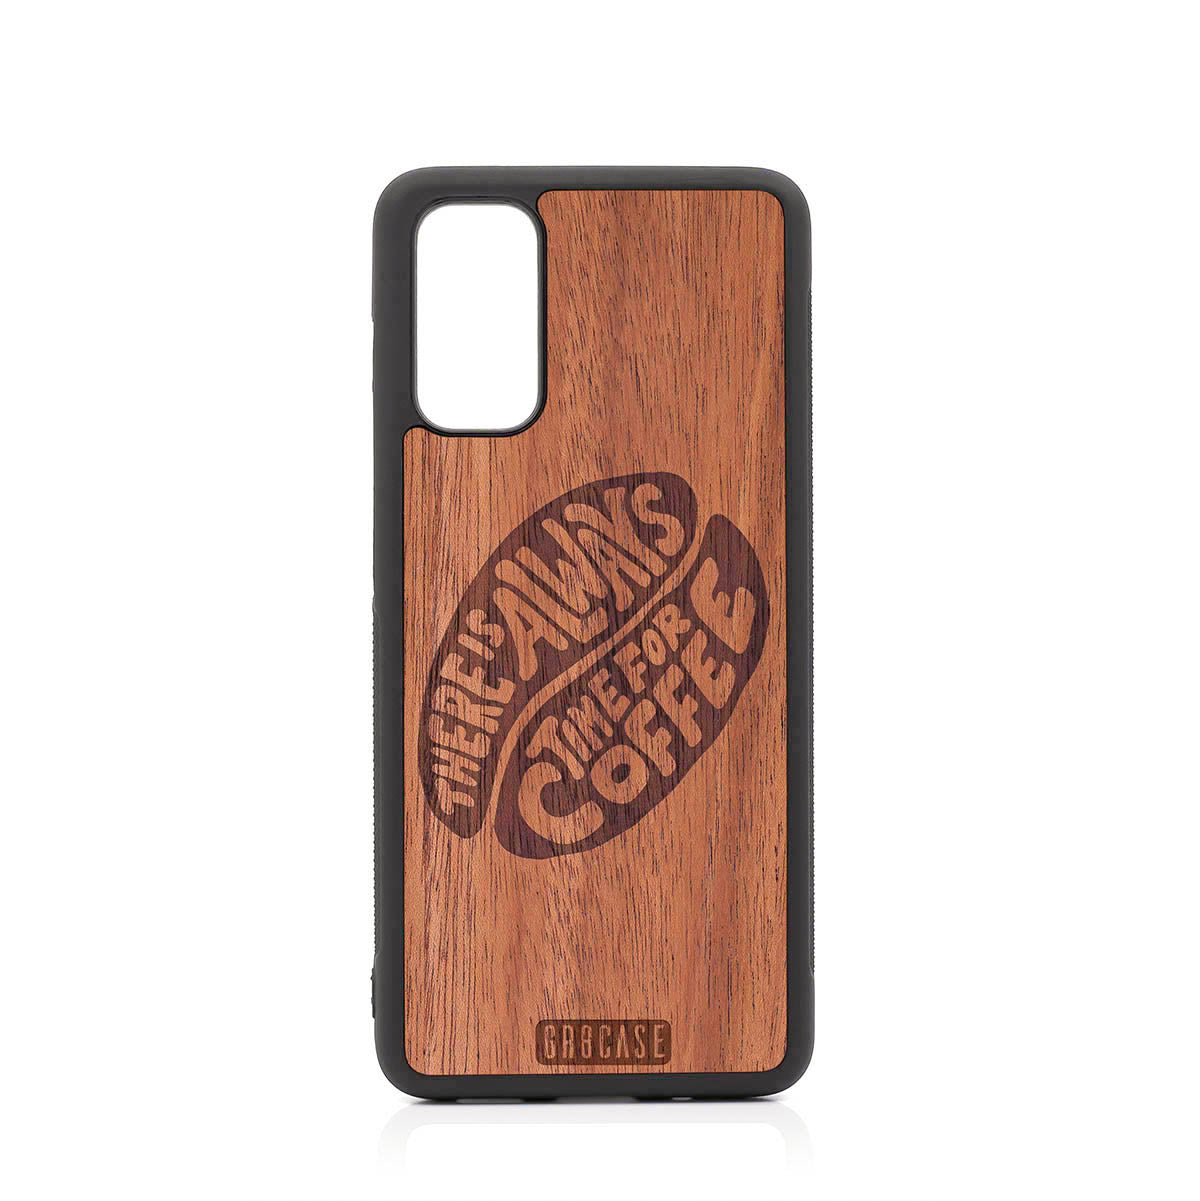 There Is Always Time For Coffee Design Wood Case For Samsung Galaxy S20